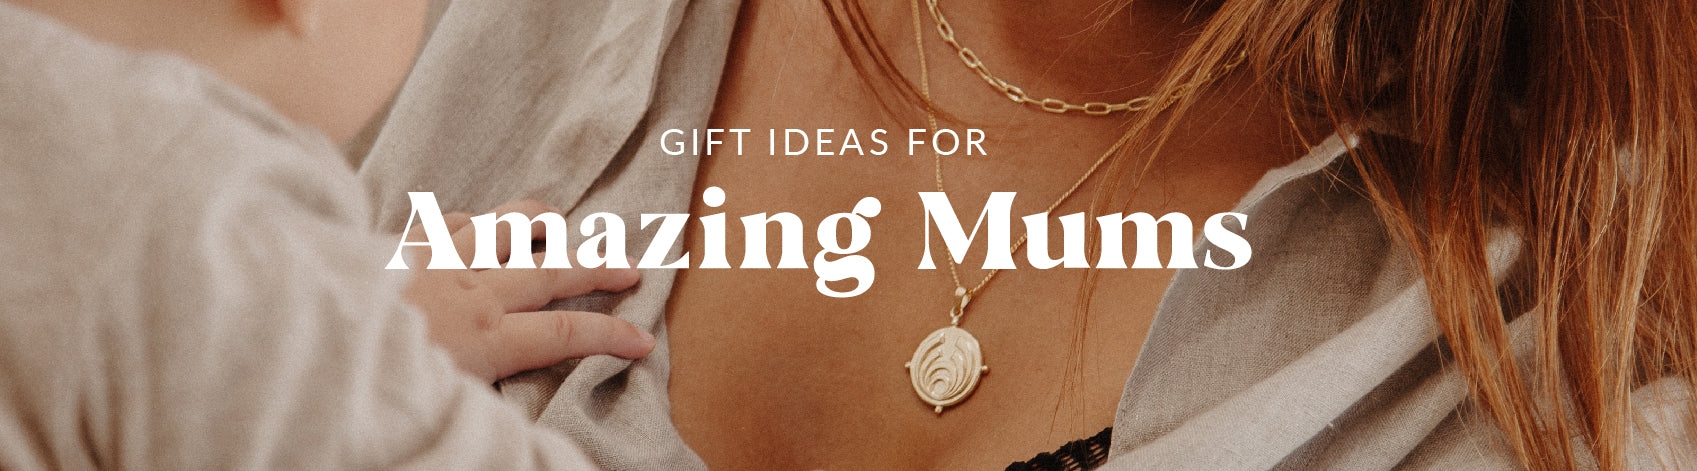 Gift Ideas for Amazing Mums